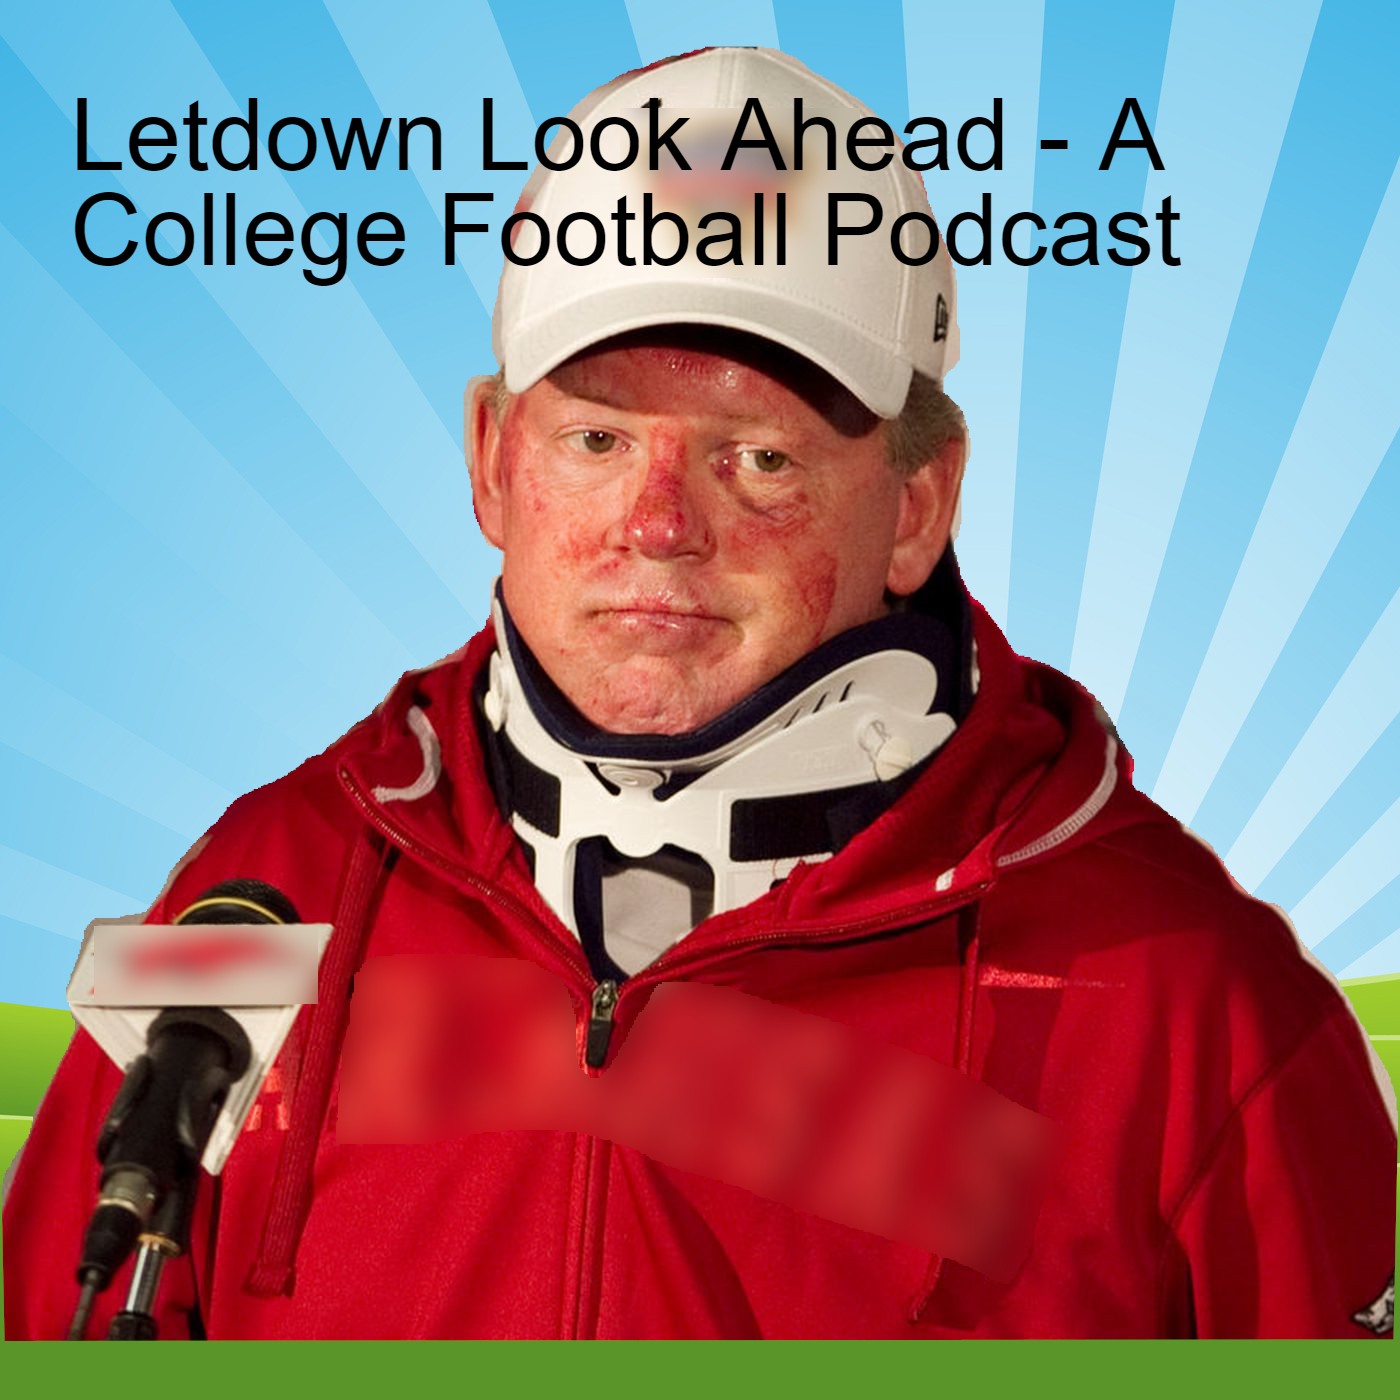 Letdown Look Ahead - A College Football Podcast